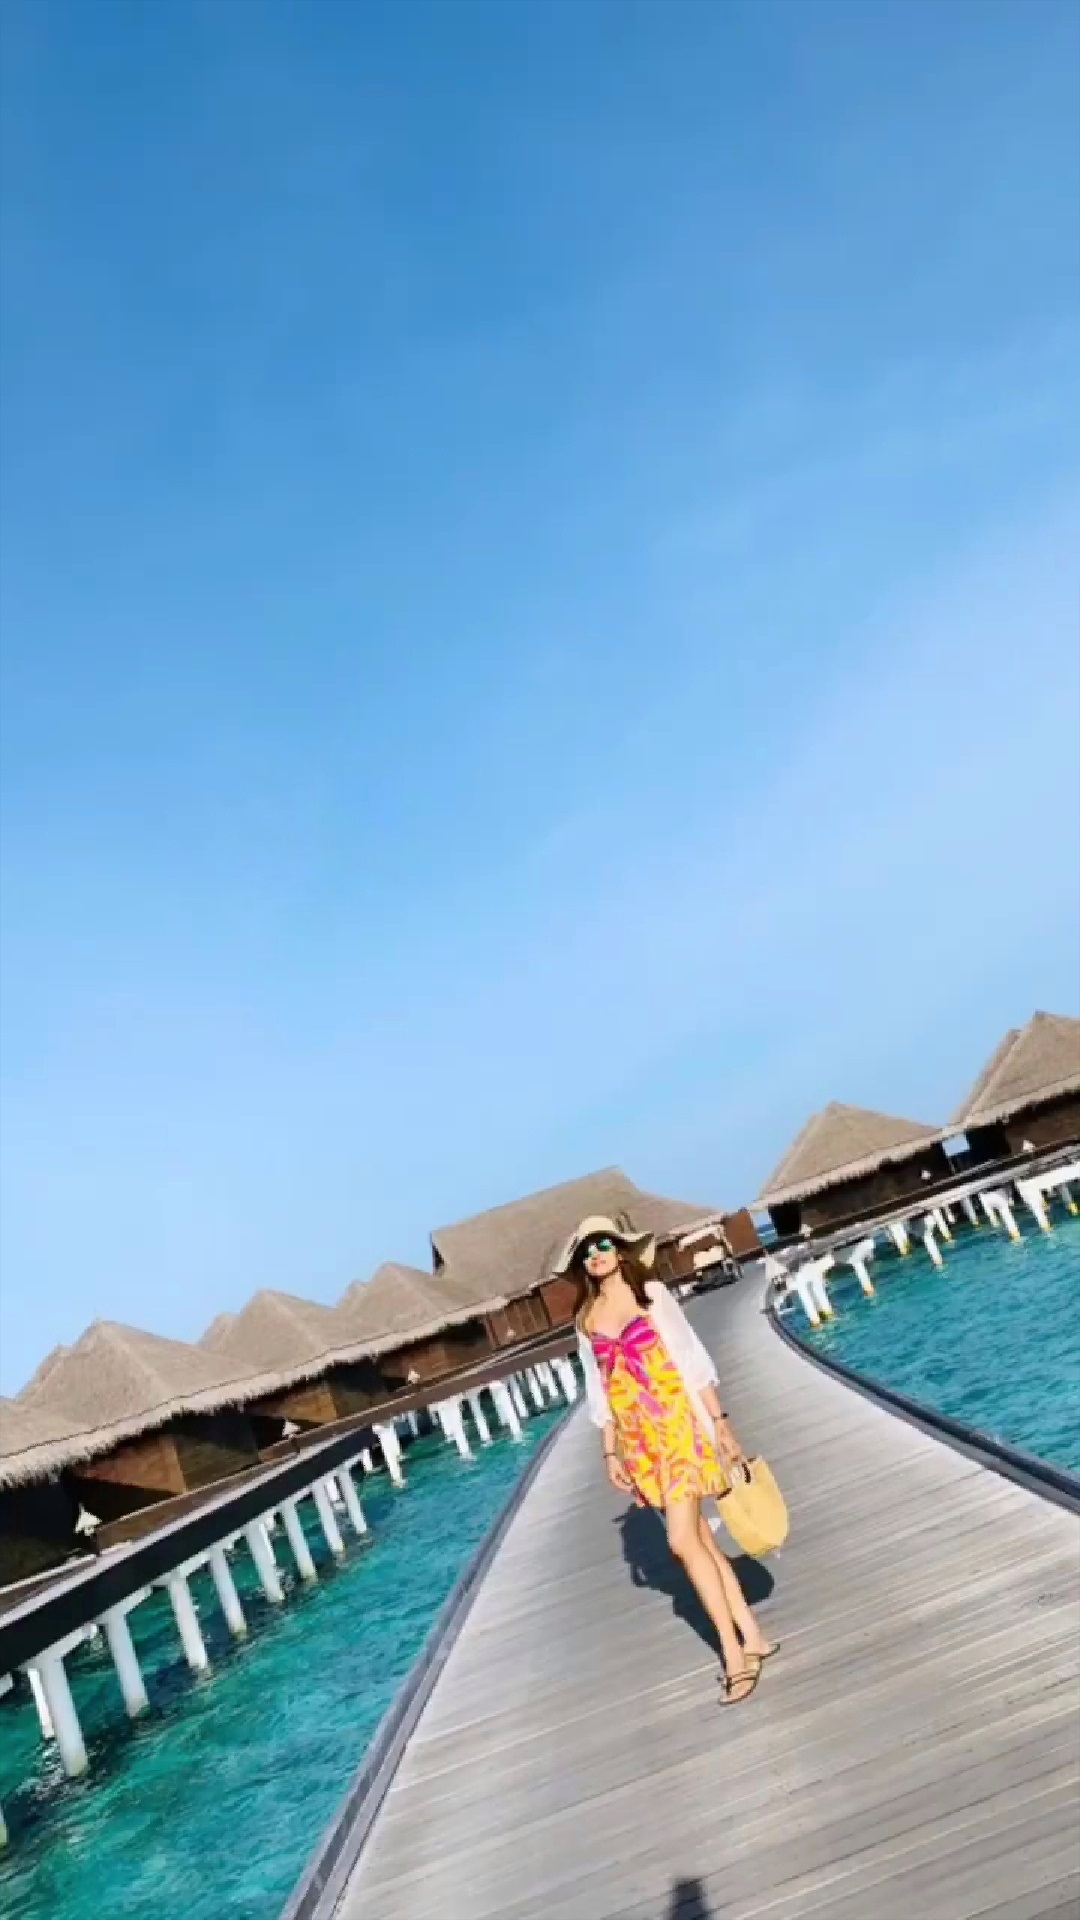 Trisha Hot In Swimsuit And Enjoying Her Vacation In Maldives